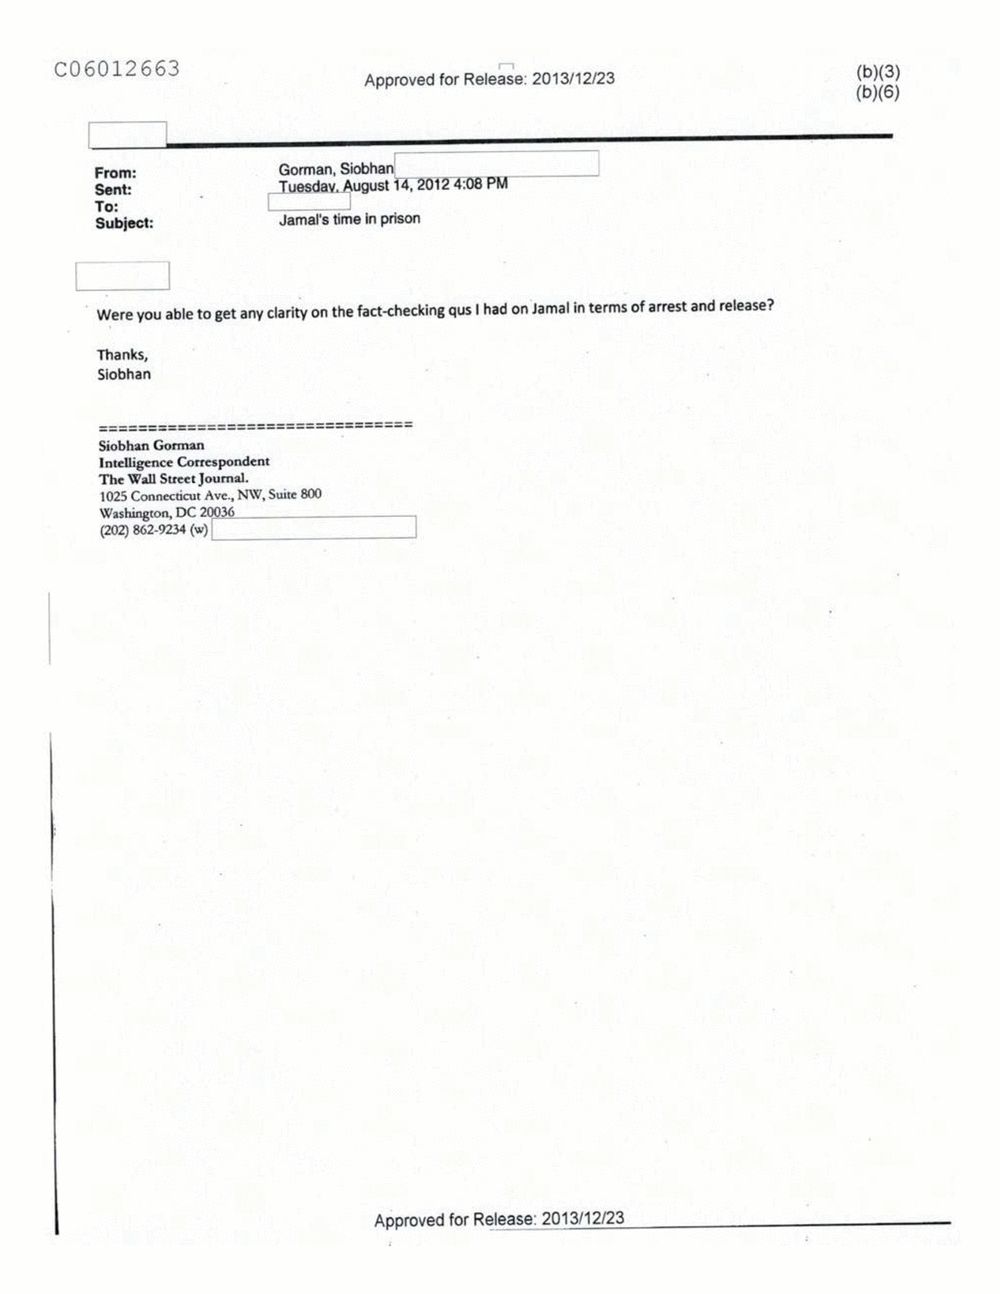 Page 241 from Email Correspondence Between Reporters and CIA Flacks